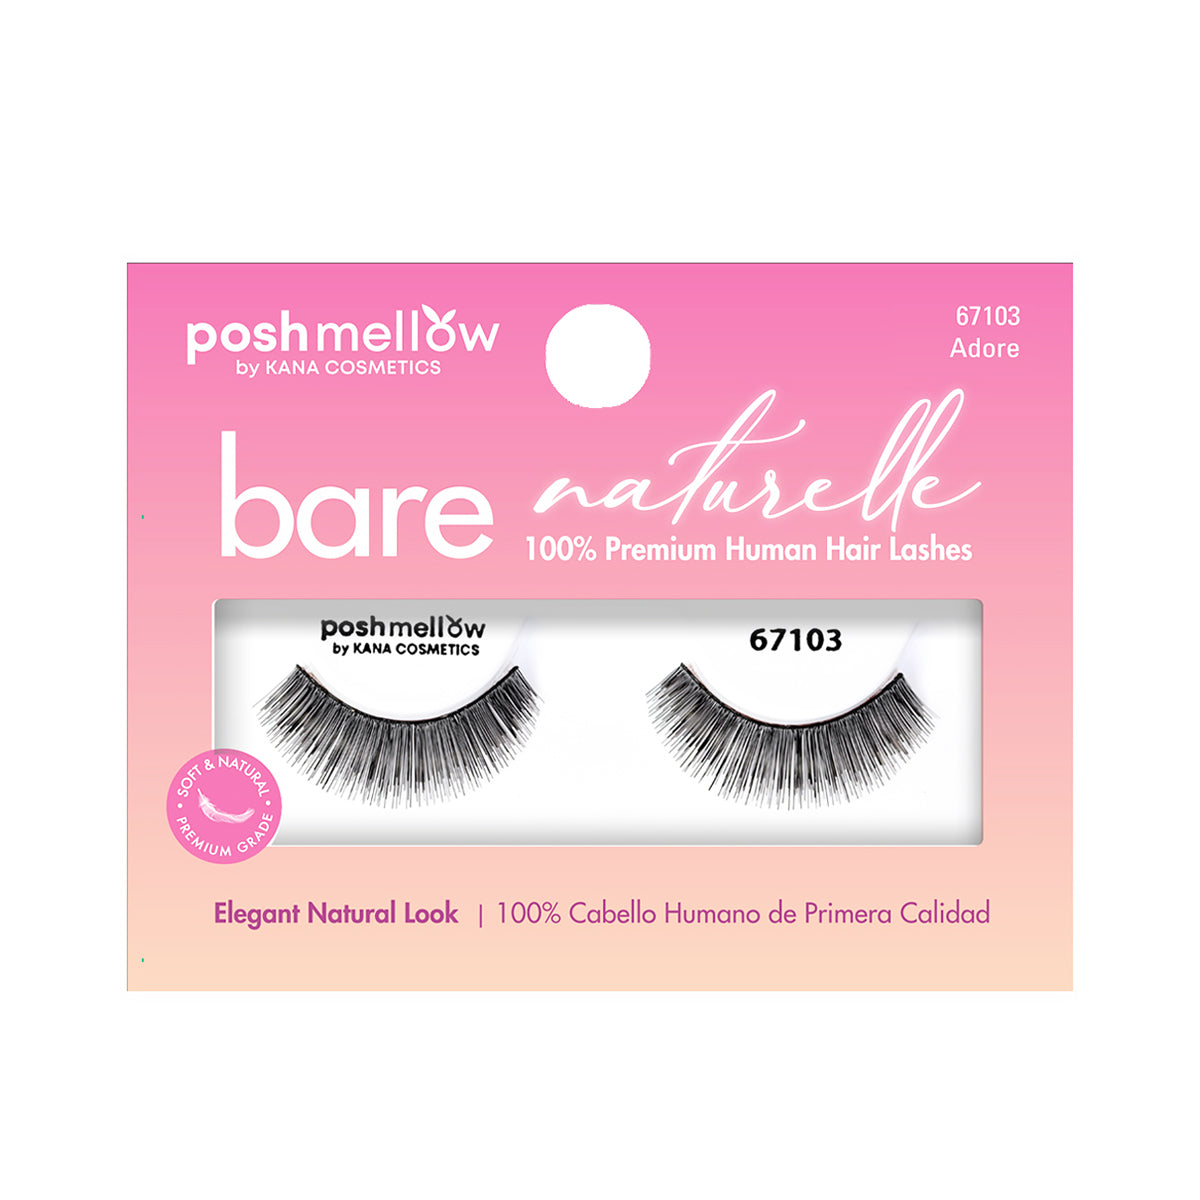 Bare Naturelle Clear Band Lashes Adore